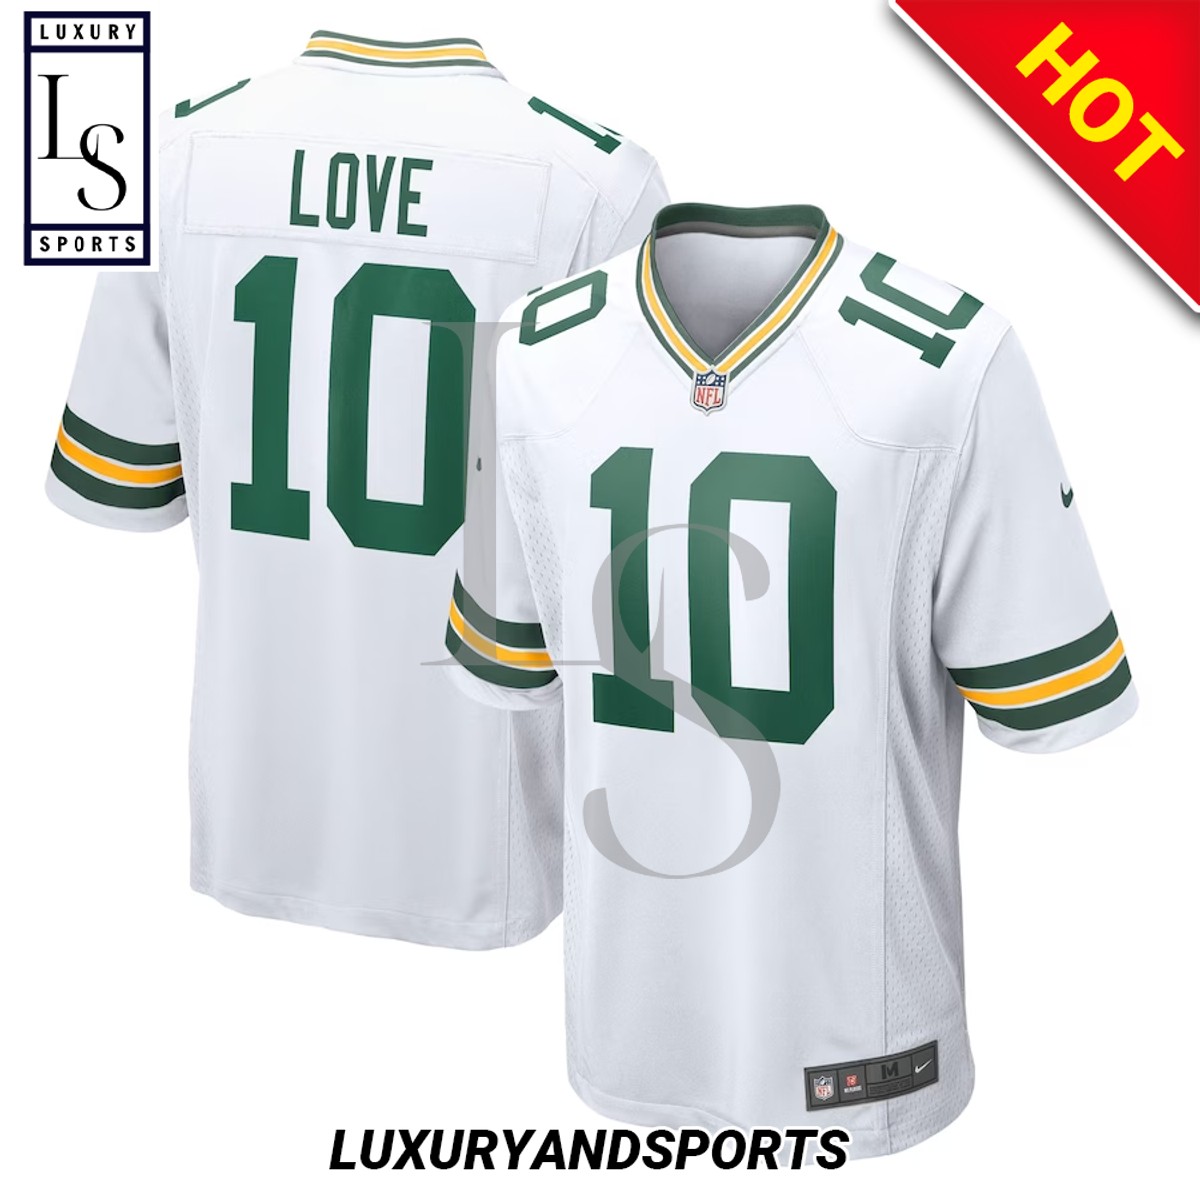 Green Bay Packers Love NFL White Football Jersey